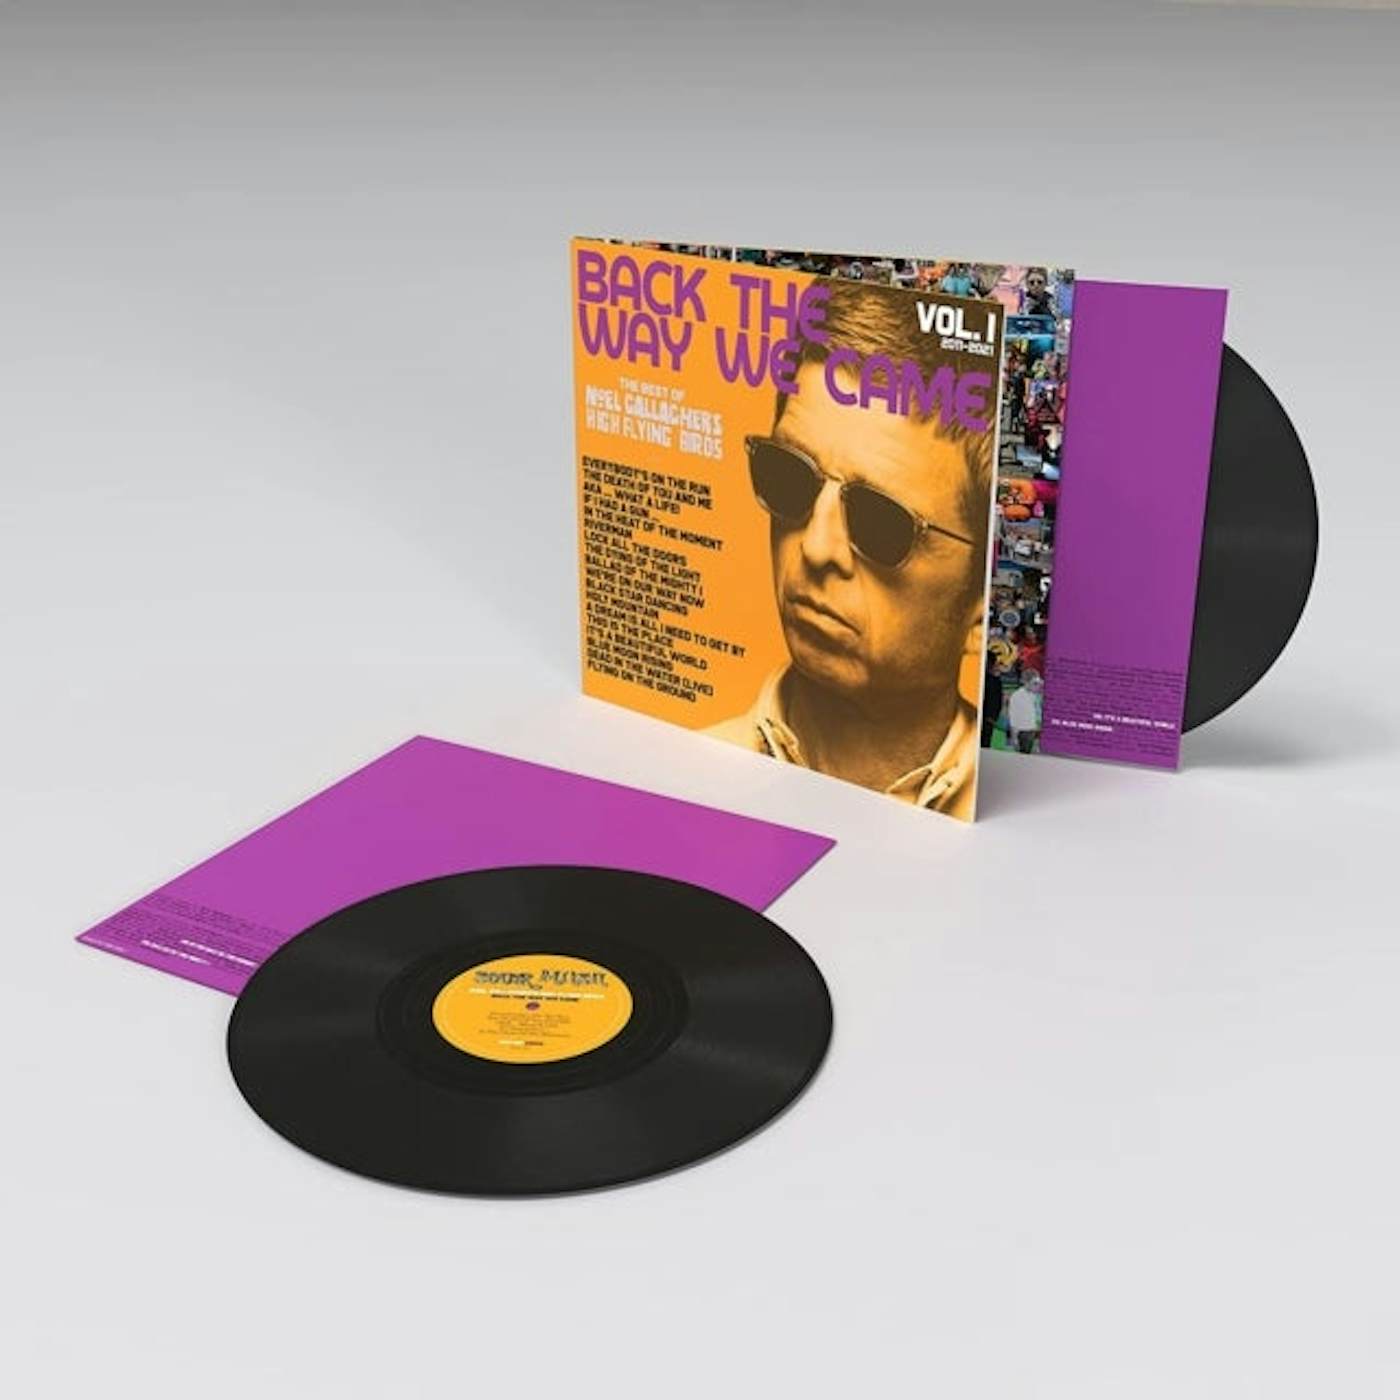 Noel Gallagher's High Flying Birds LP Vinyl Record - Back The Way We Came: Vol. 1 (20. 11 -20. 21)